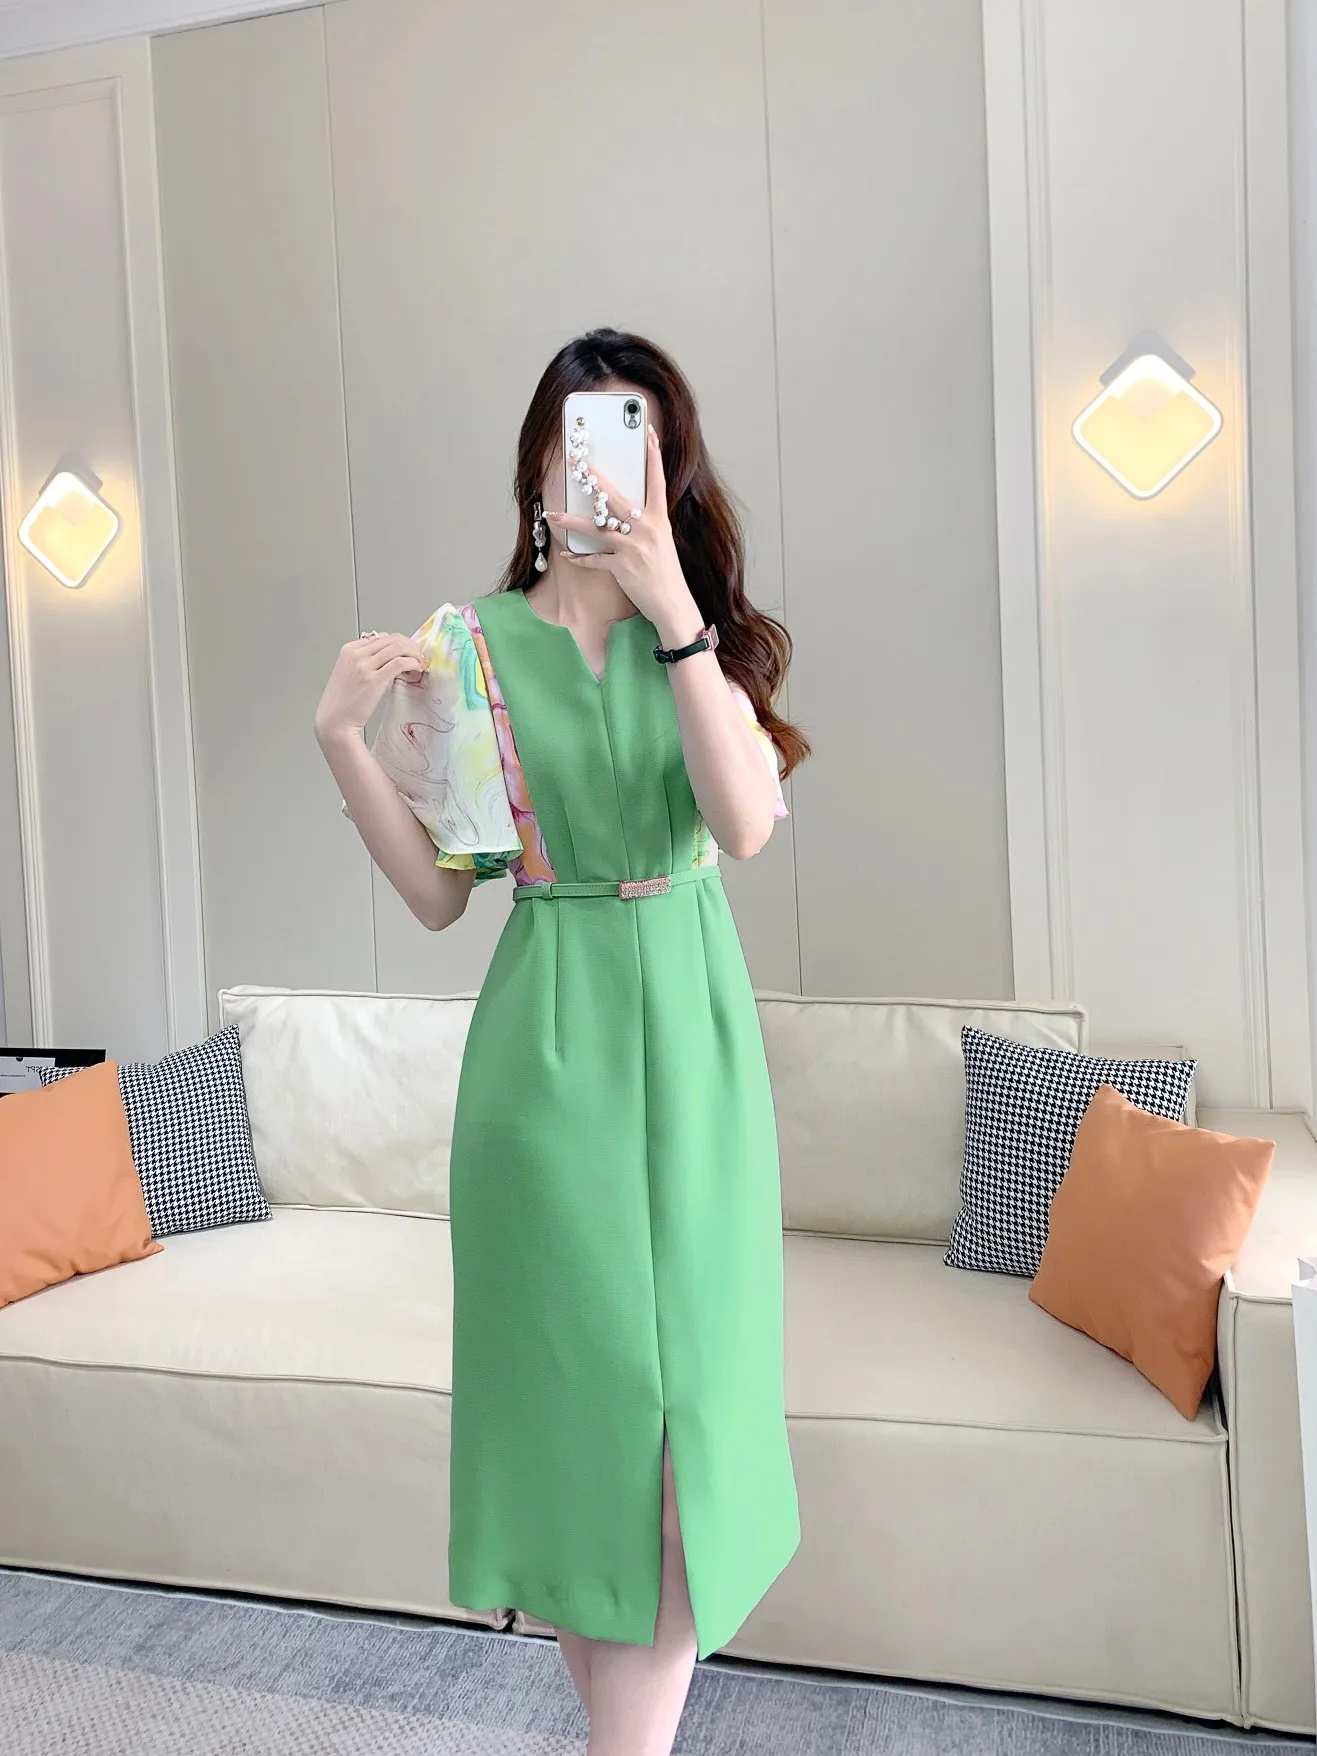 2023 spring and summer women's clothing fashion new V-neck Dress 0511